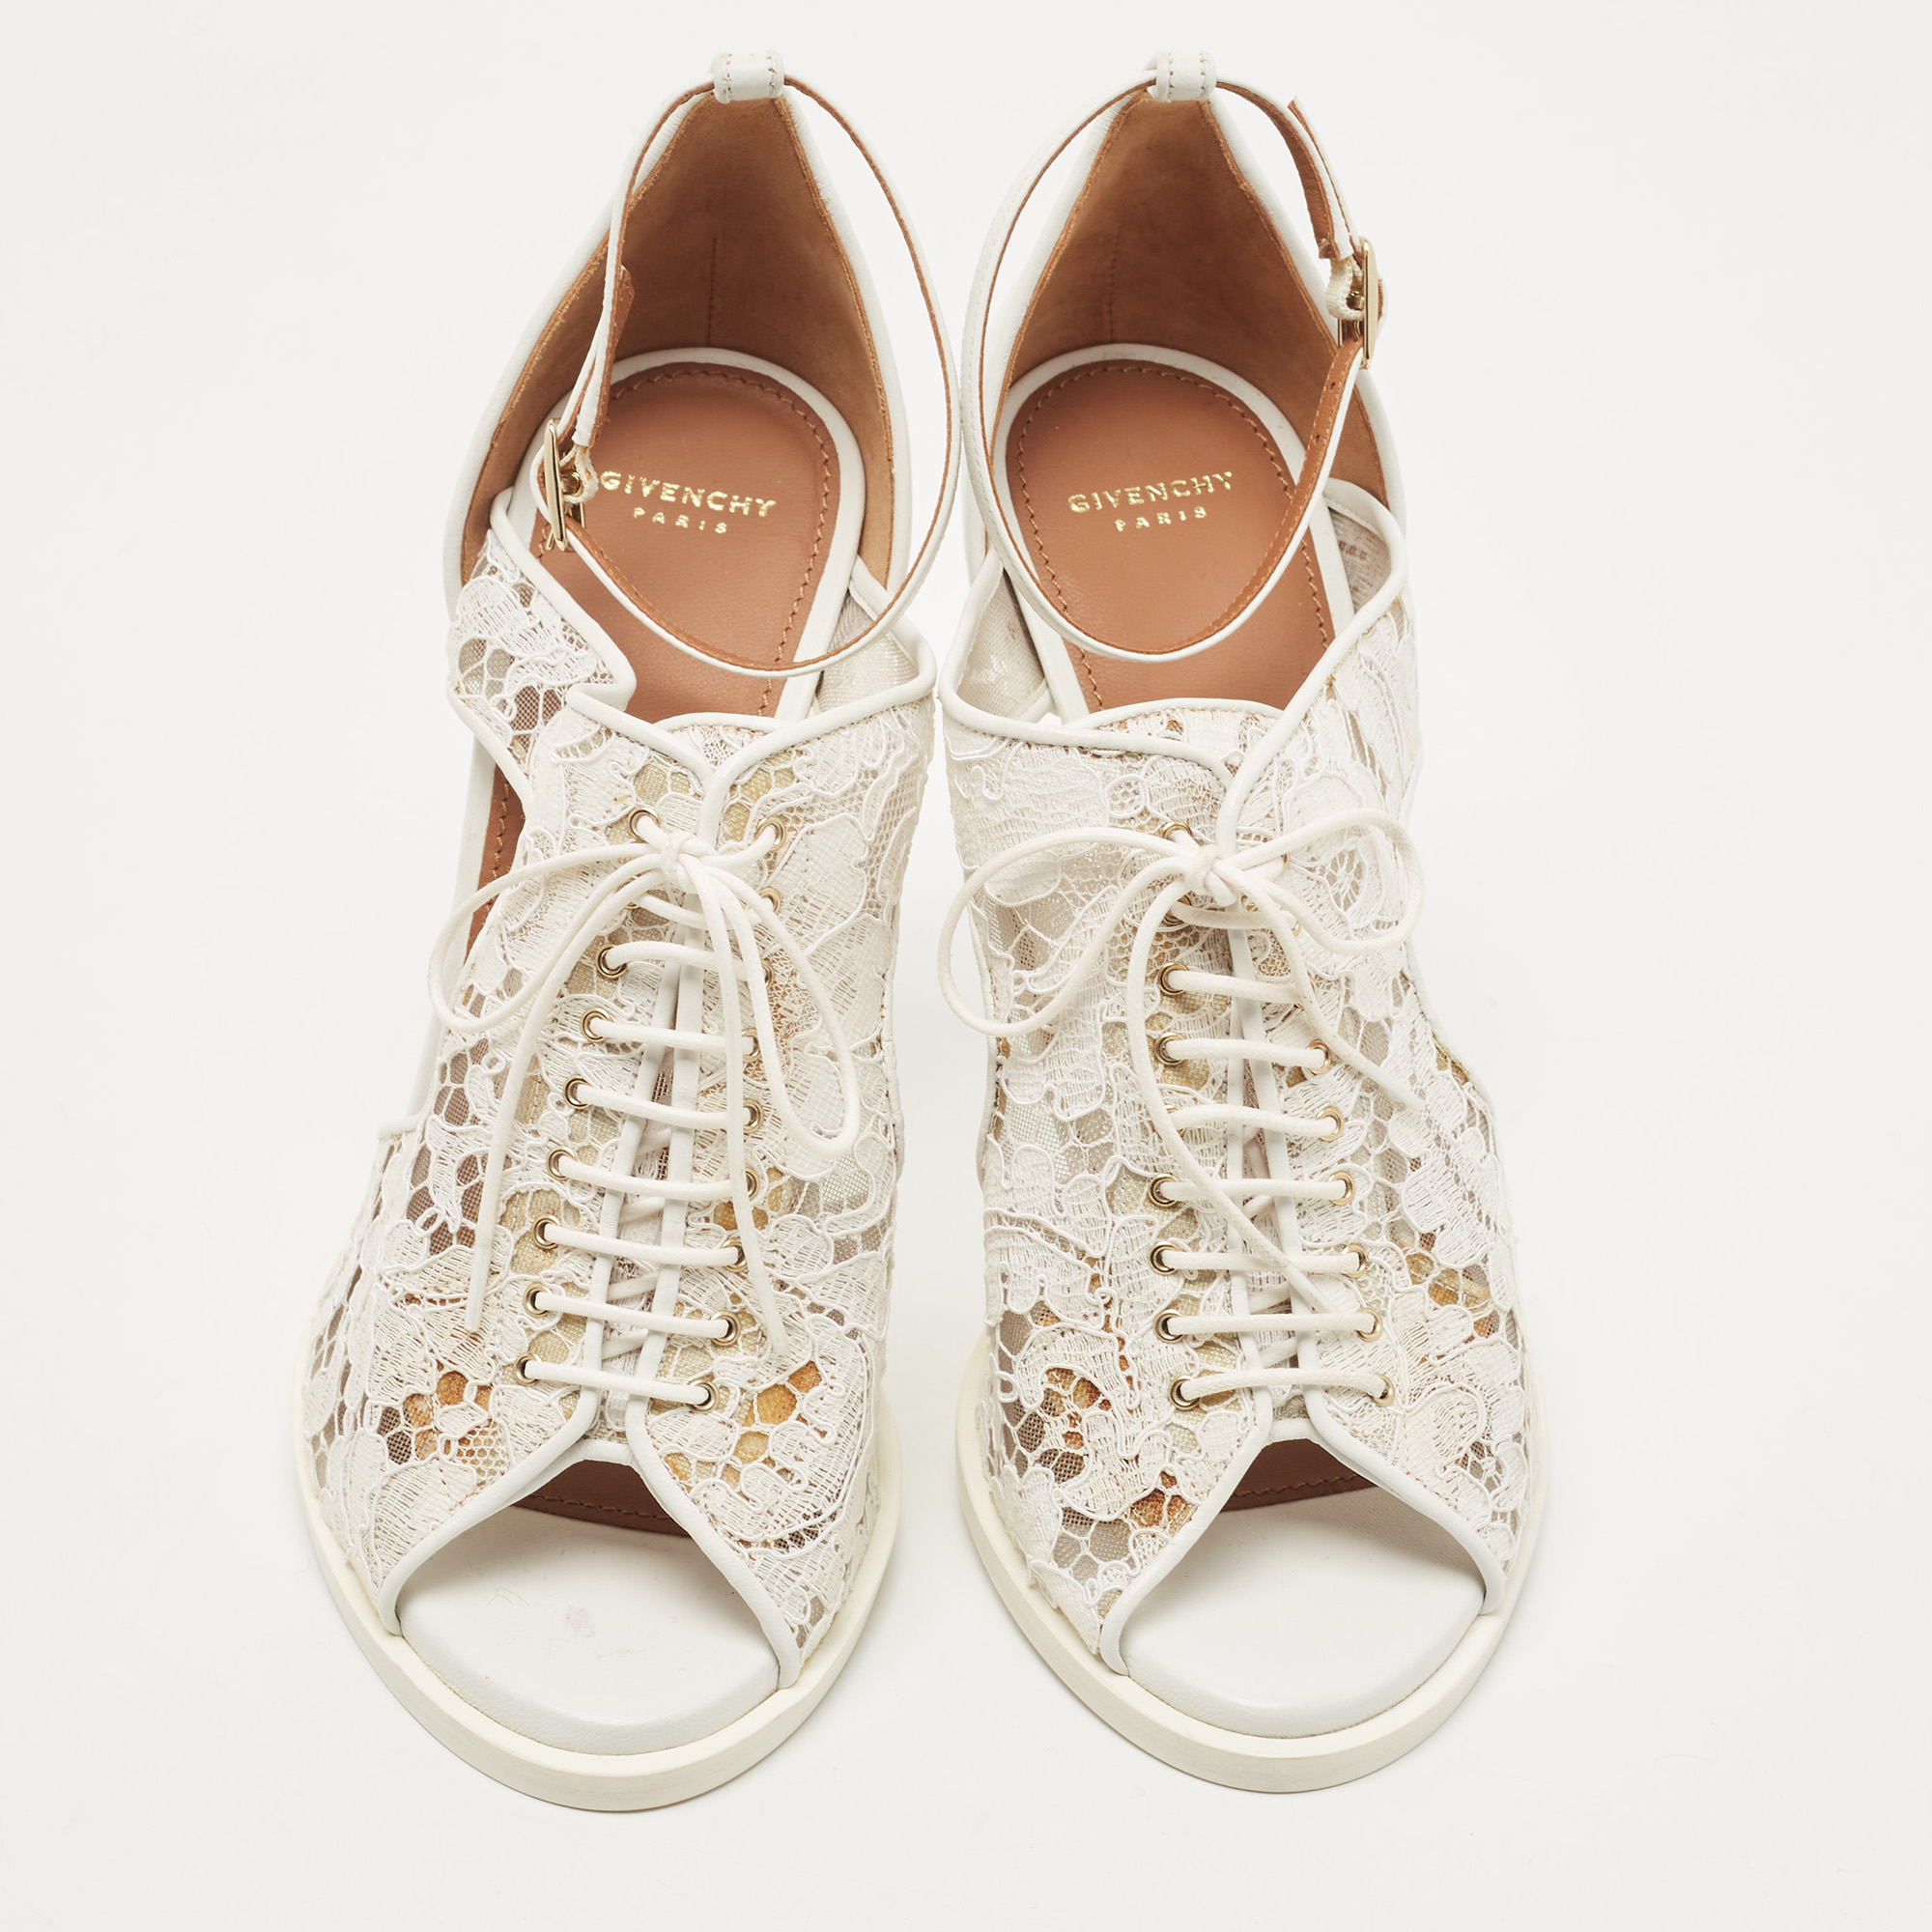 Givenchy White Lace And Leather Lace Up Ankle Strap Sandals Size 38